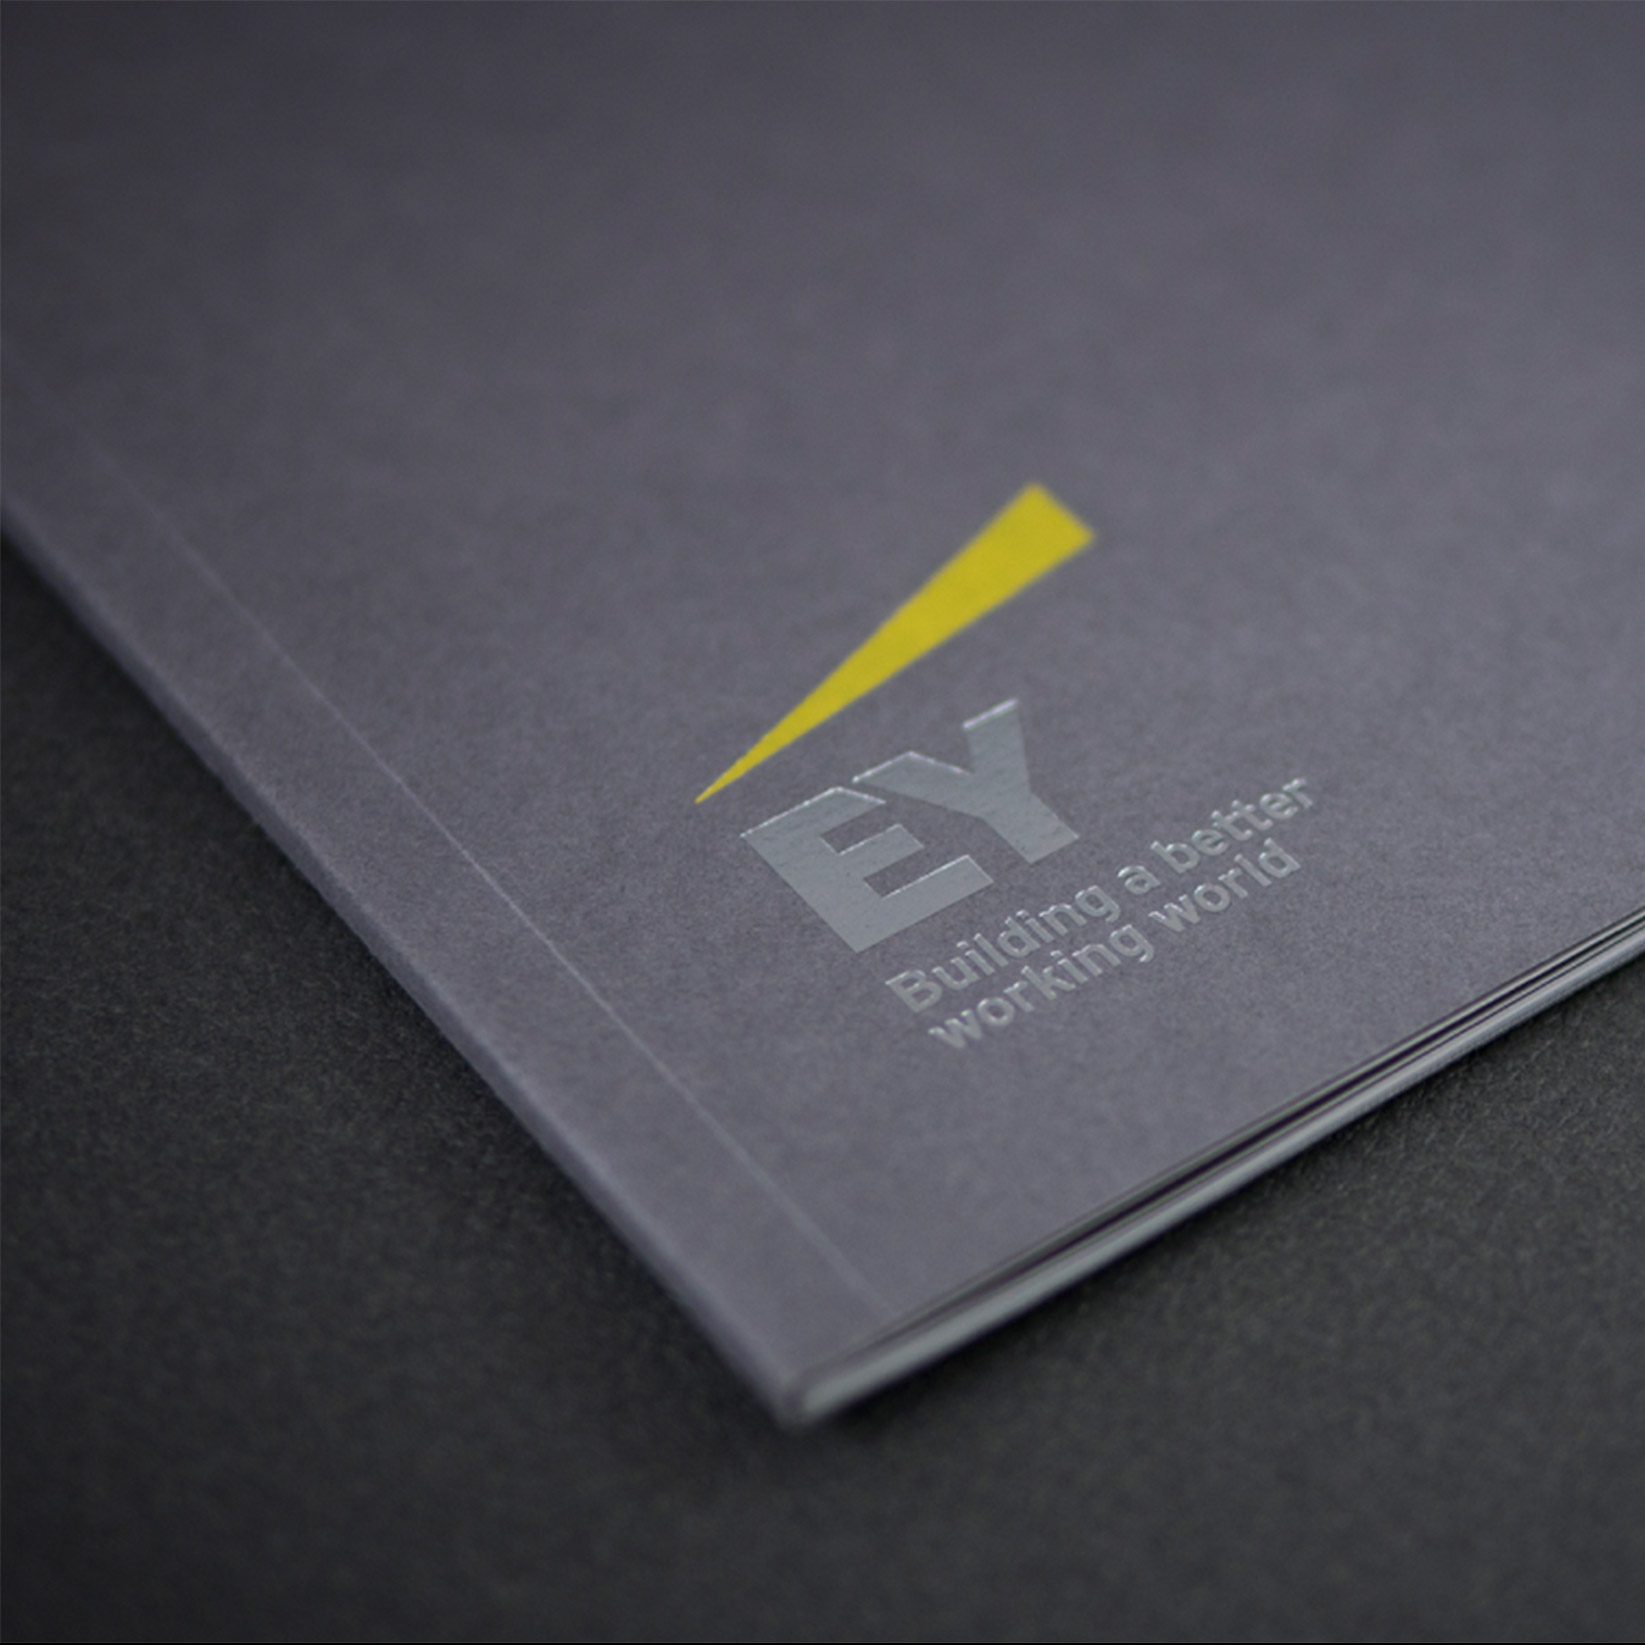 EY – Multi-channel collateral for a multi-national organisation